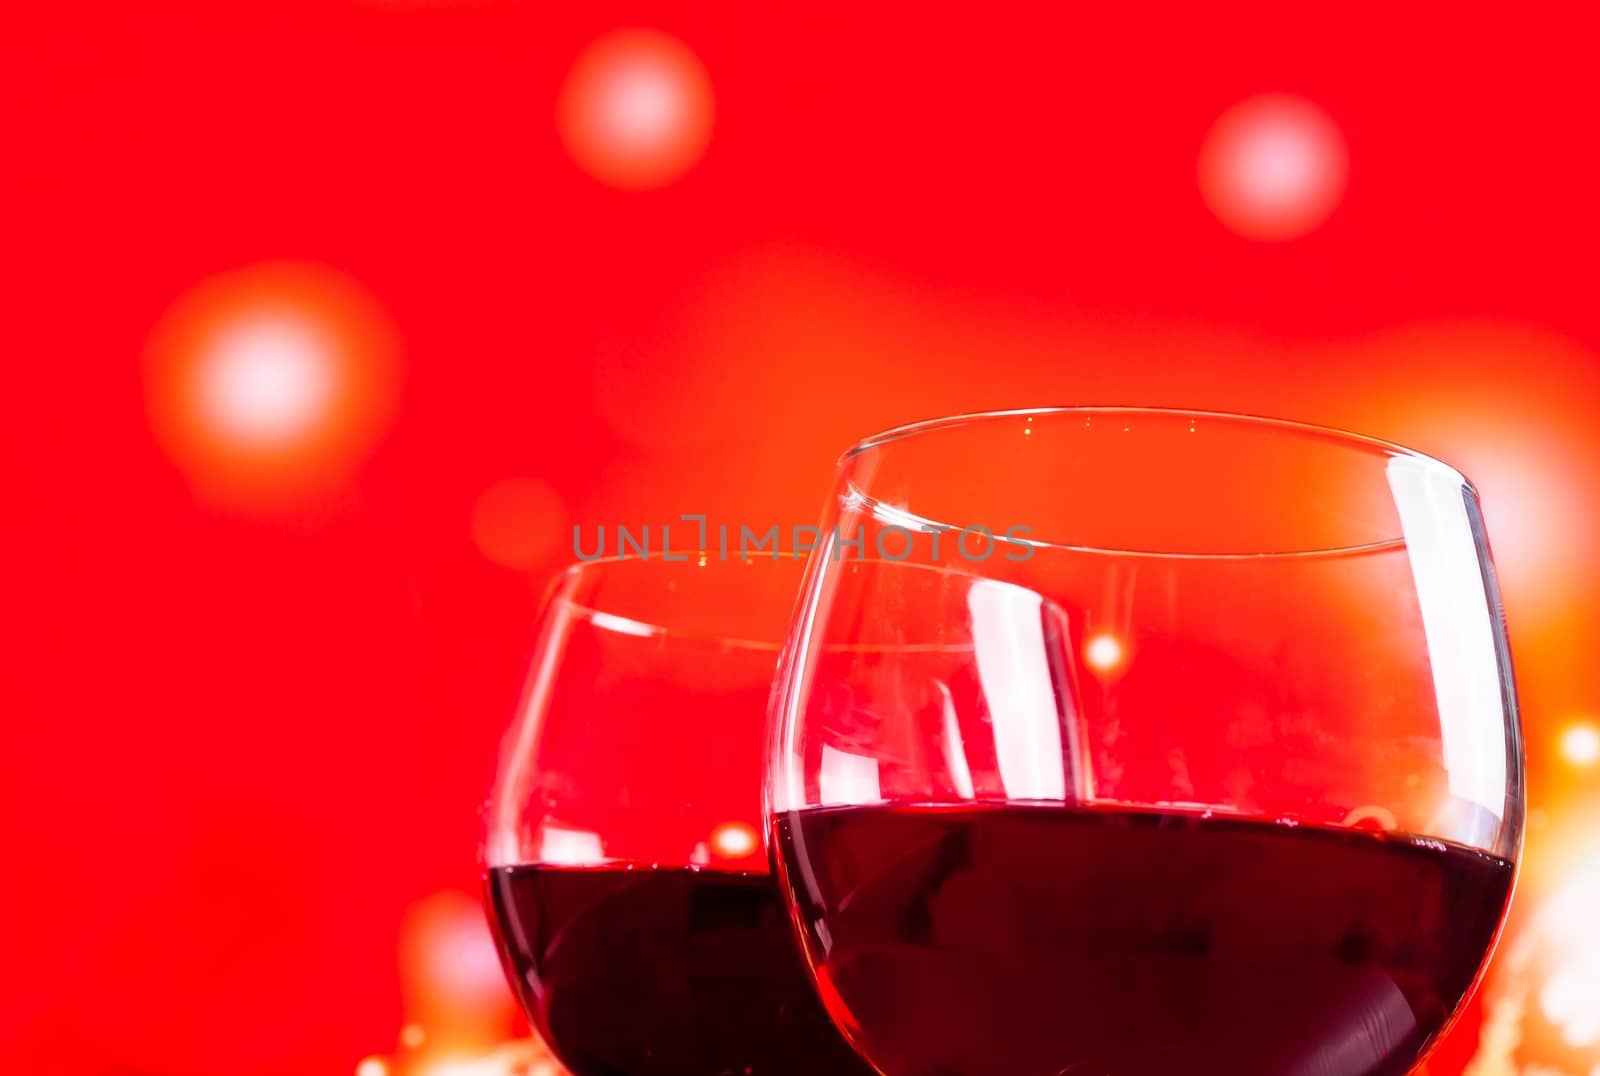 two red wine glasses near the bottle against red lights background by donfiore